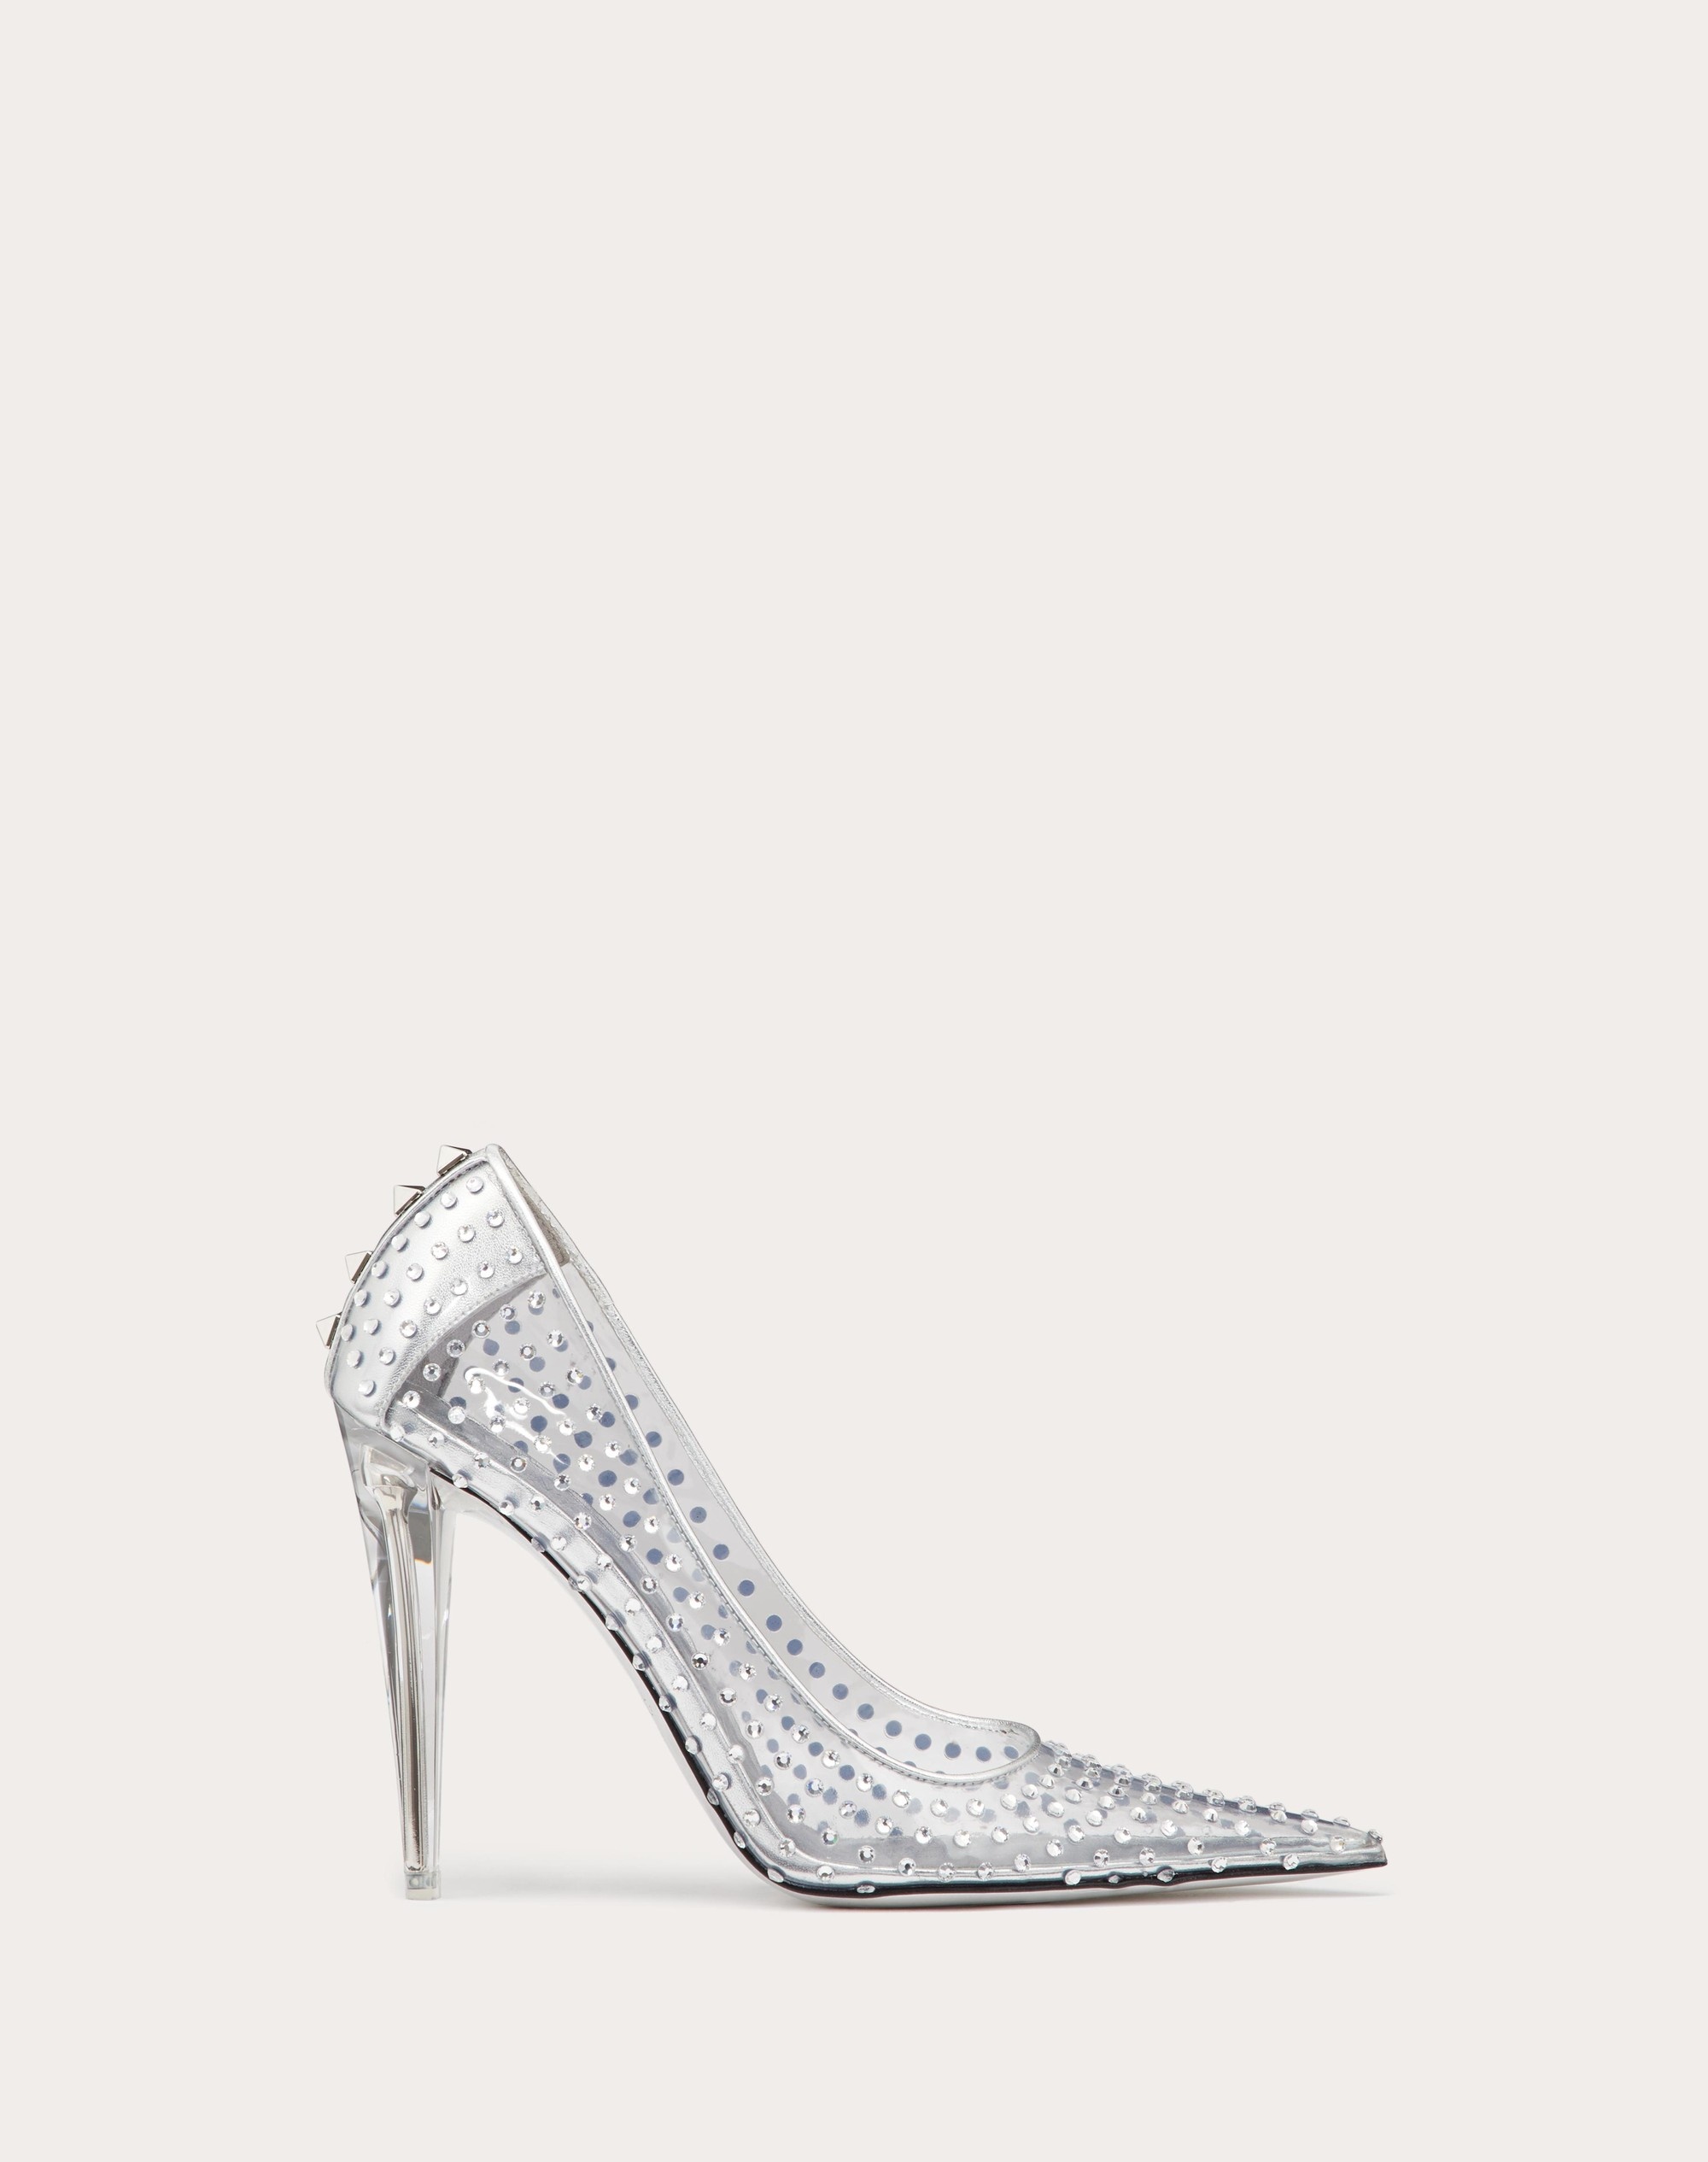 ROCKSTUD PUMP IN POLYMER MATERIAL WITH CRYSTAL APPLIQUÉS AND 110 MM PLEXI HEEL - 1